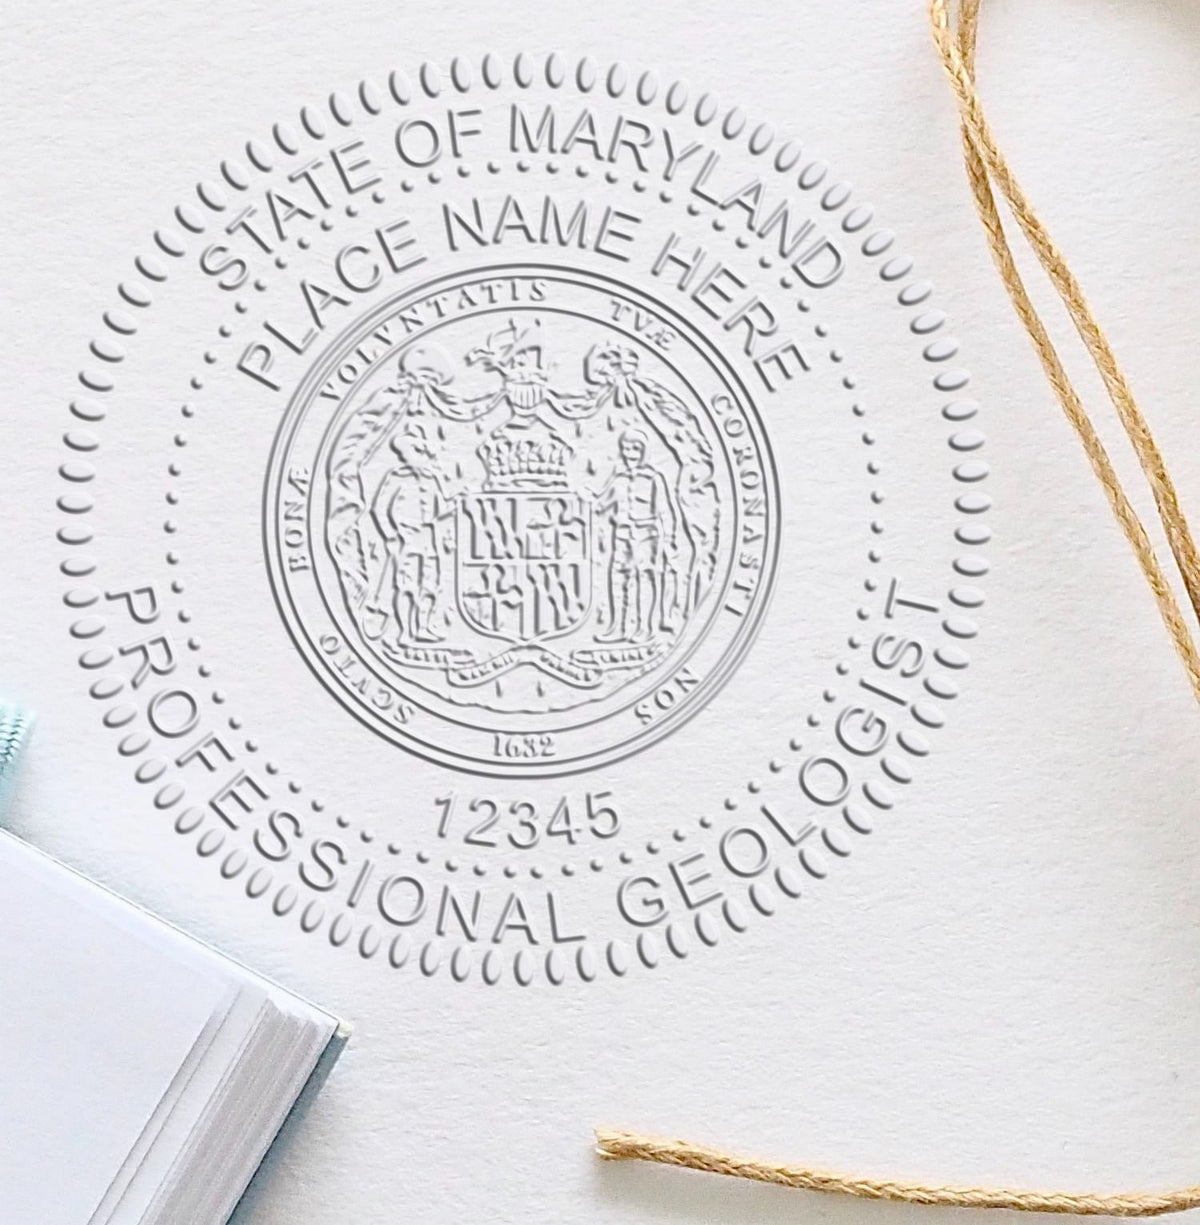 A stamped imprint of the State of Maryland Extended Long Reach Geologist Seal in this stylish lifestyle photo, setting the tone for a unique and personalized product.